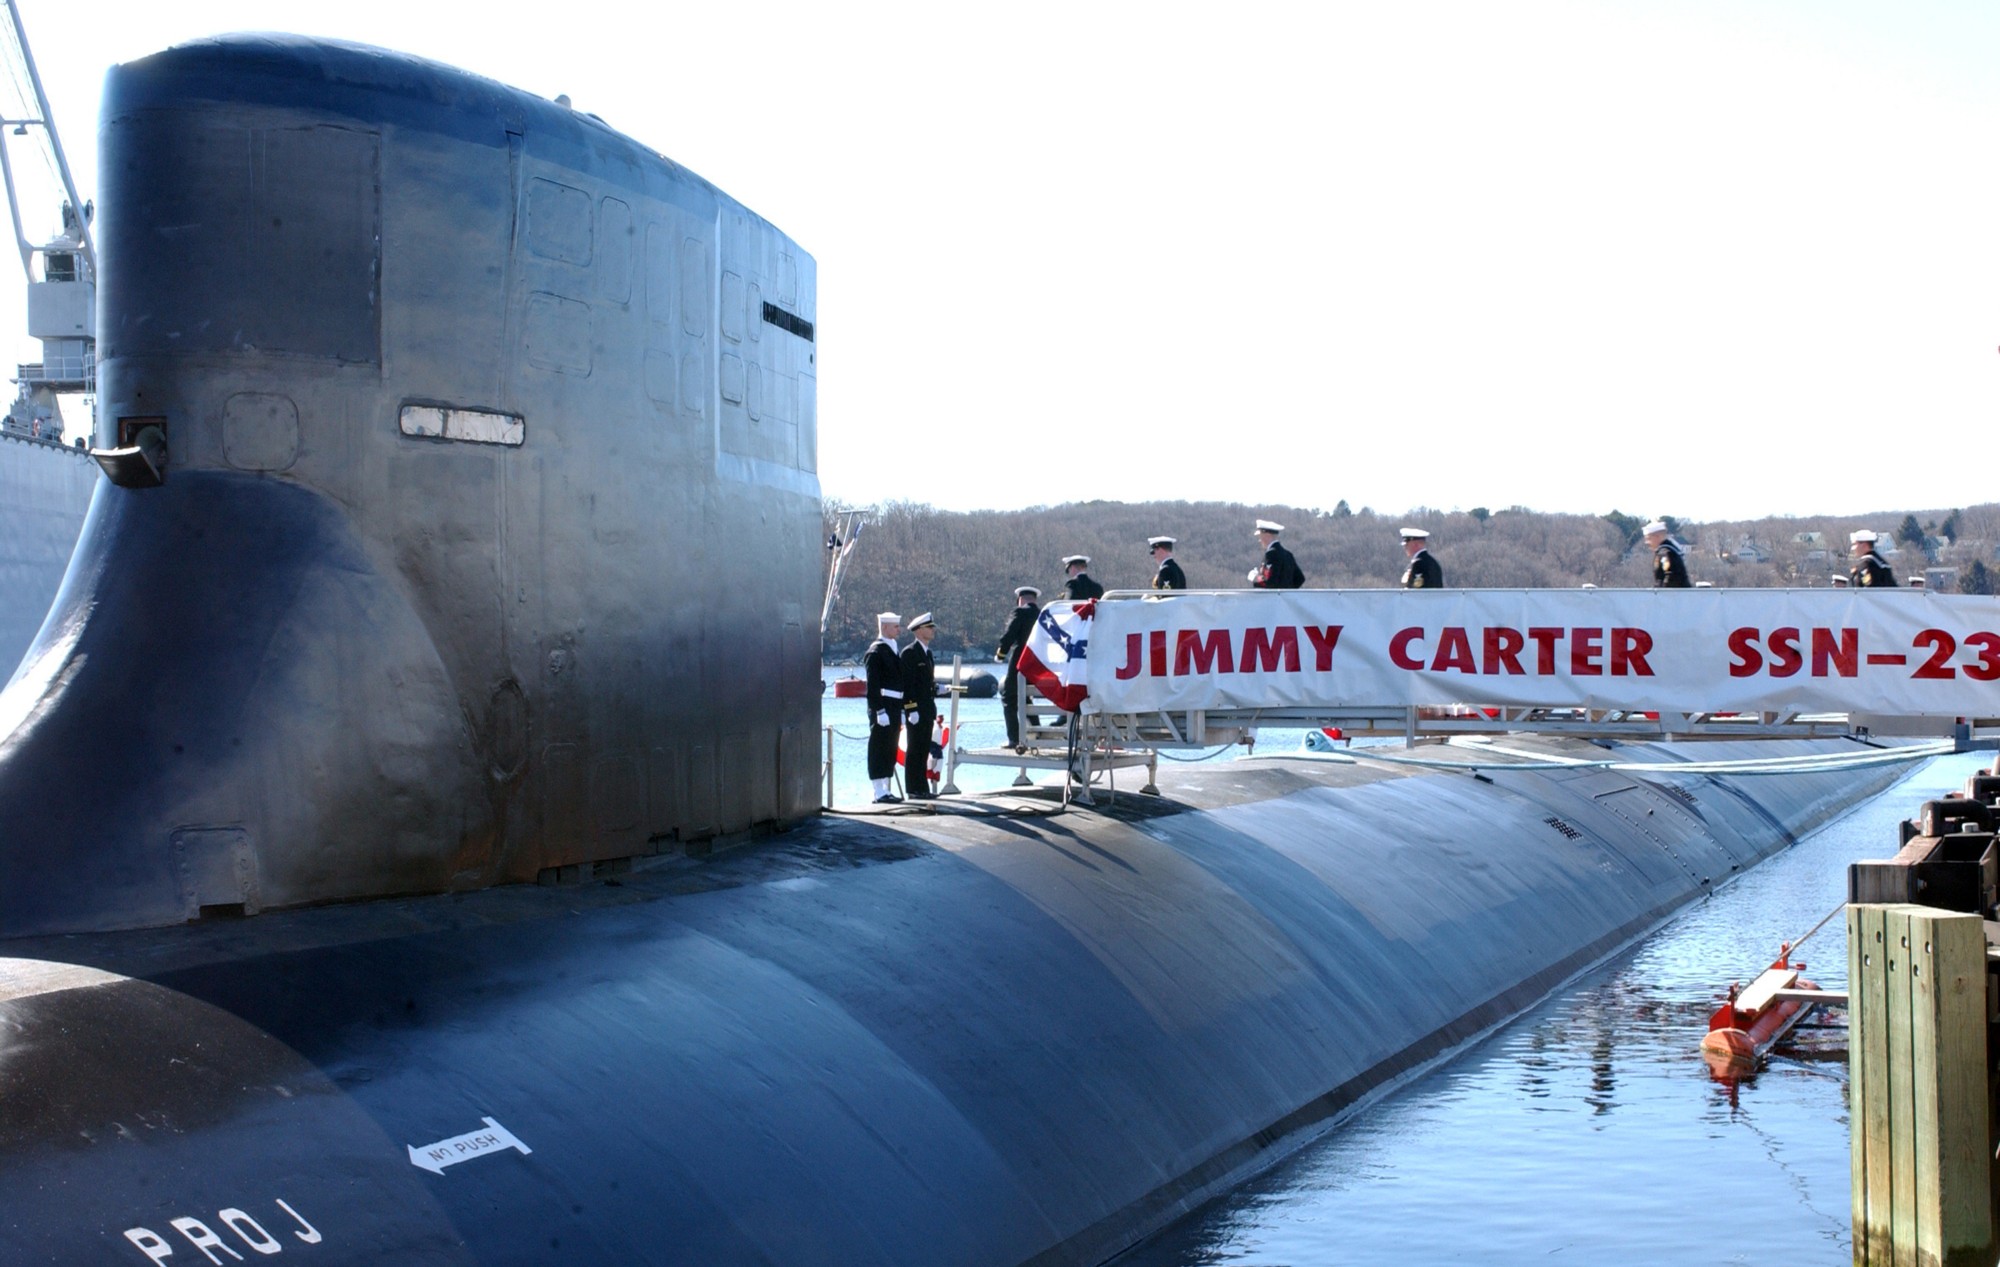 ssn-23 uss jimmy carter seawolf class attack submarine us navy commissioning groton connecticut 04